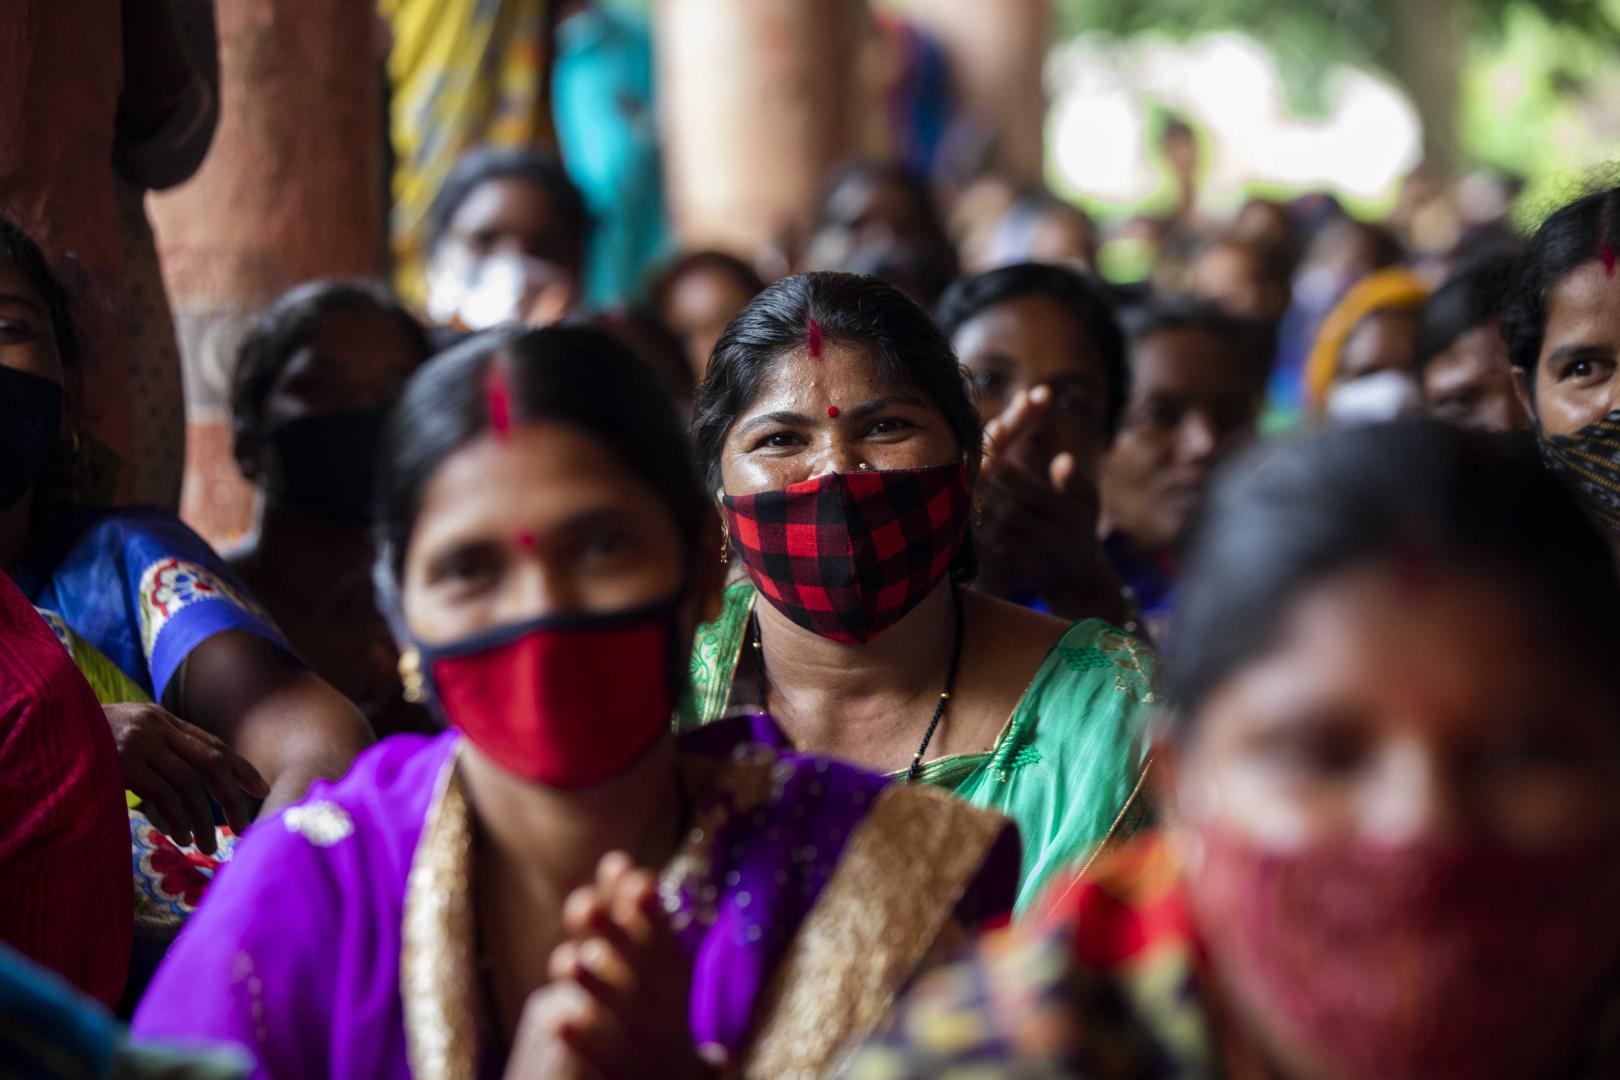 Women attend an interactive session with the UN Women team in Urbengi village in the Dhenkanal district of Odisha. Photo: UN Women India/Prashanth Vishwanathan